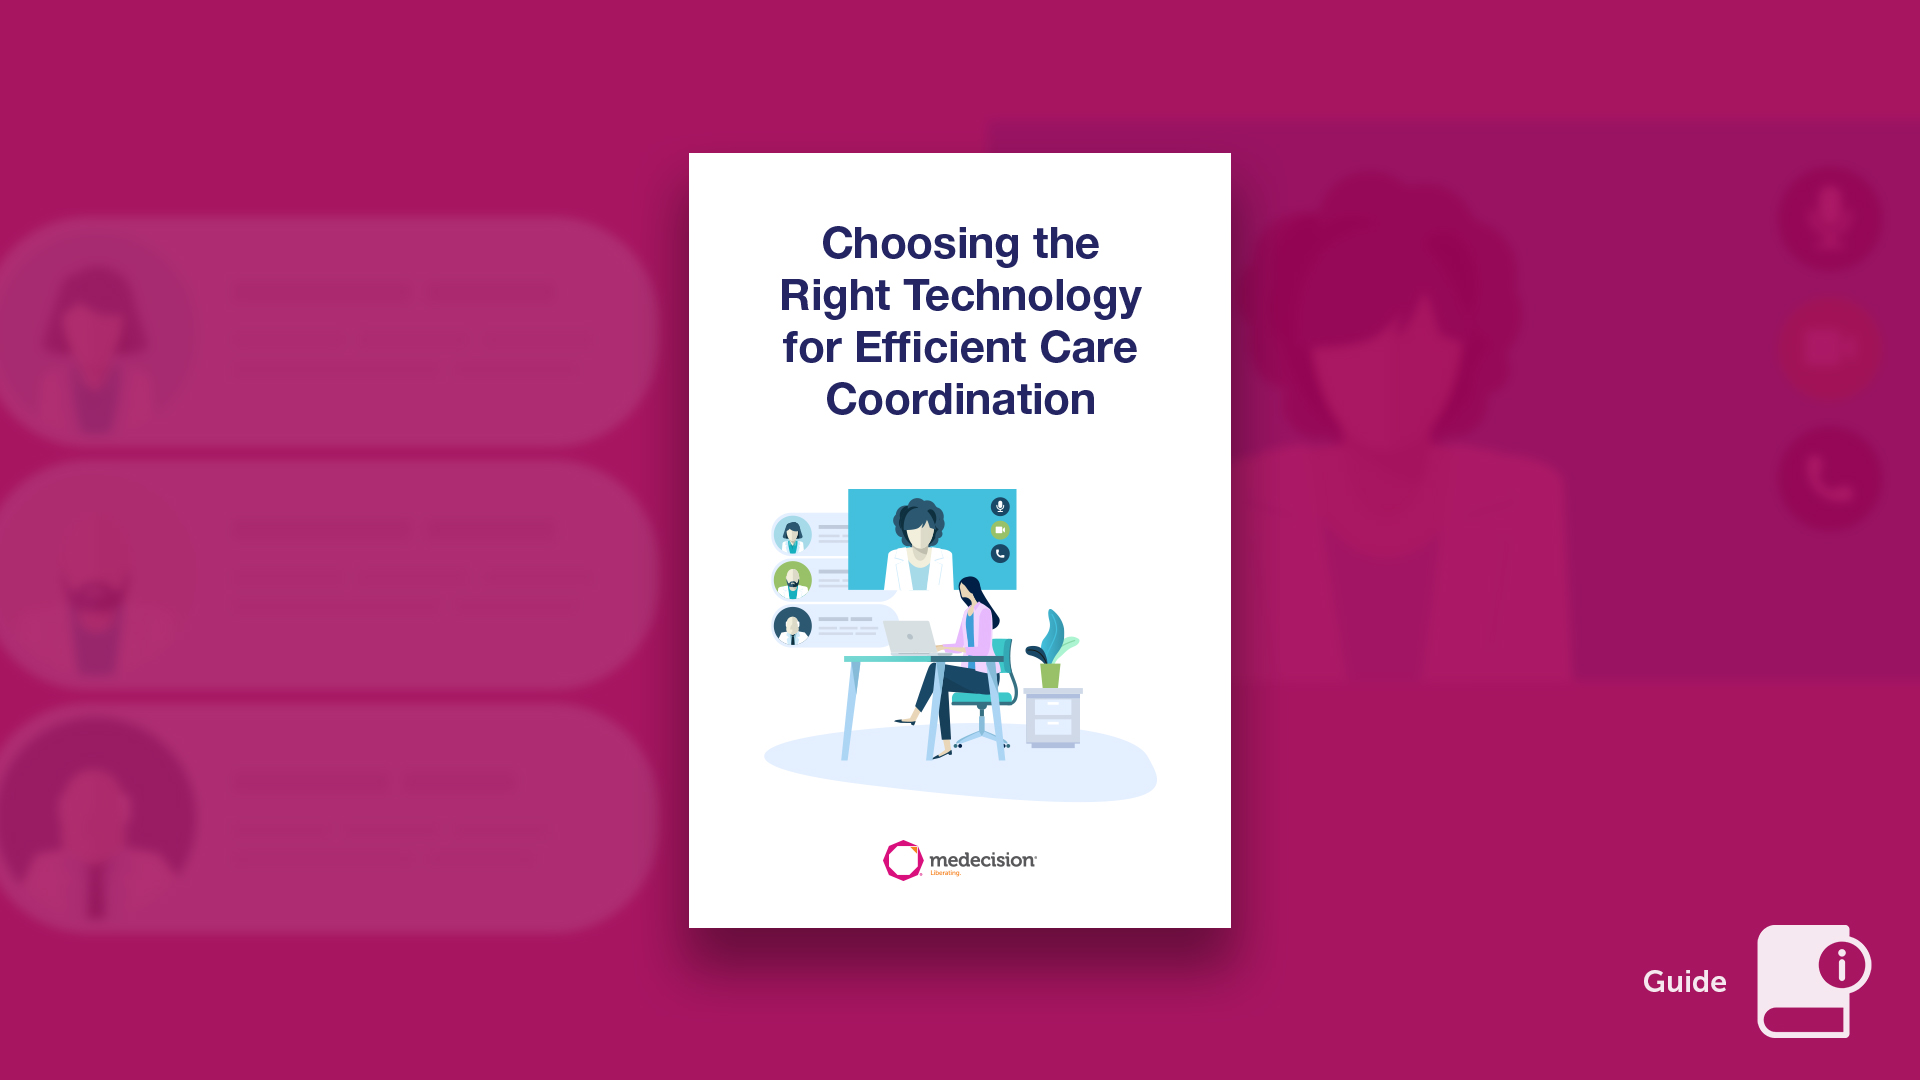 Choosing the Right Technology for Efficient Care Coordination